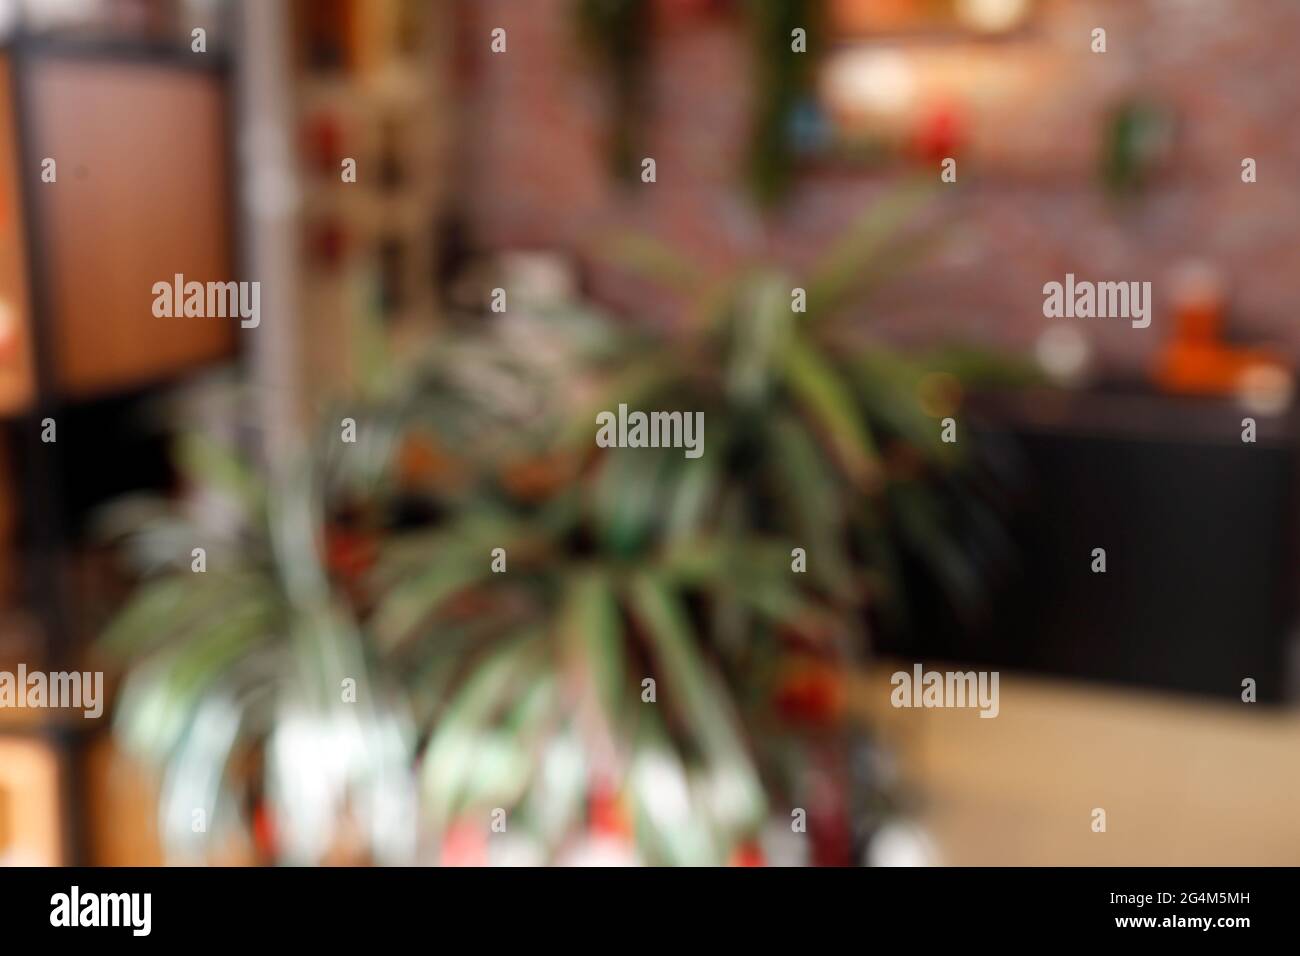 home or office unfocused background scene Stock Photo